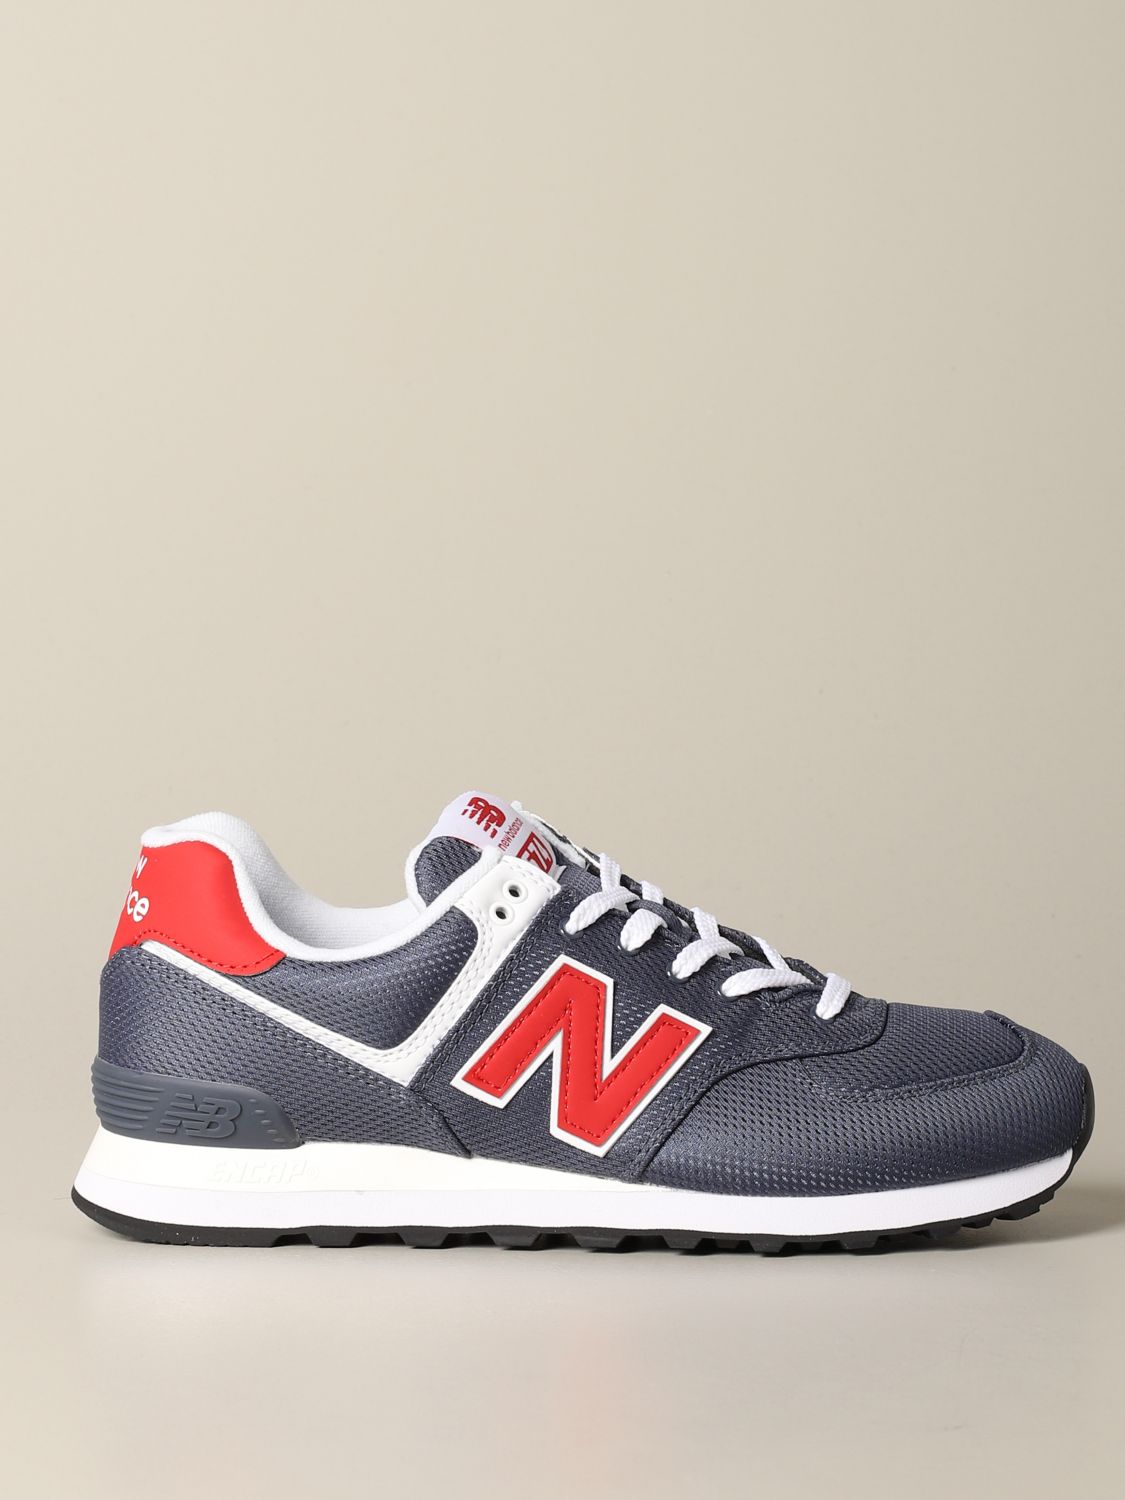 New Balance Outlet: Sneakers 574 in rete e pelle | Sneakers New ...